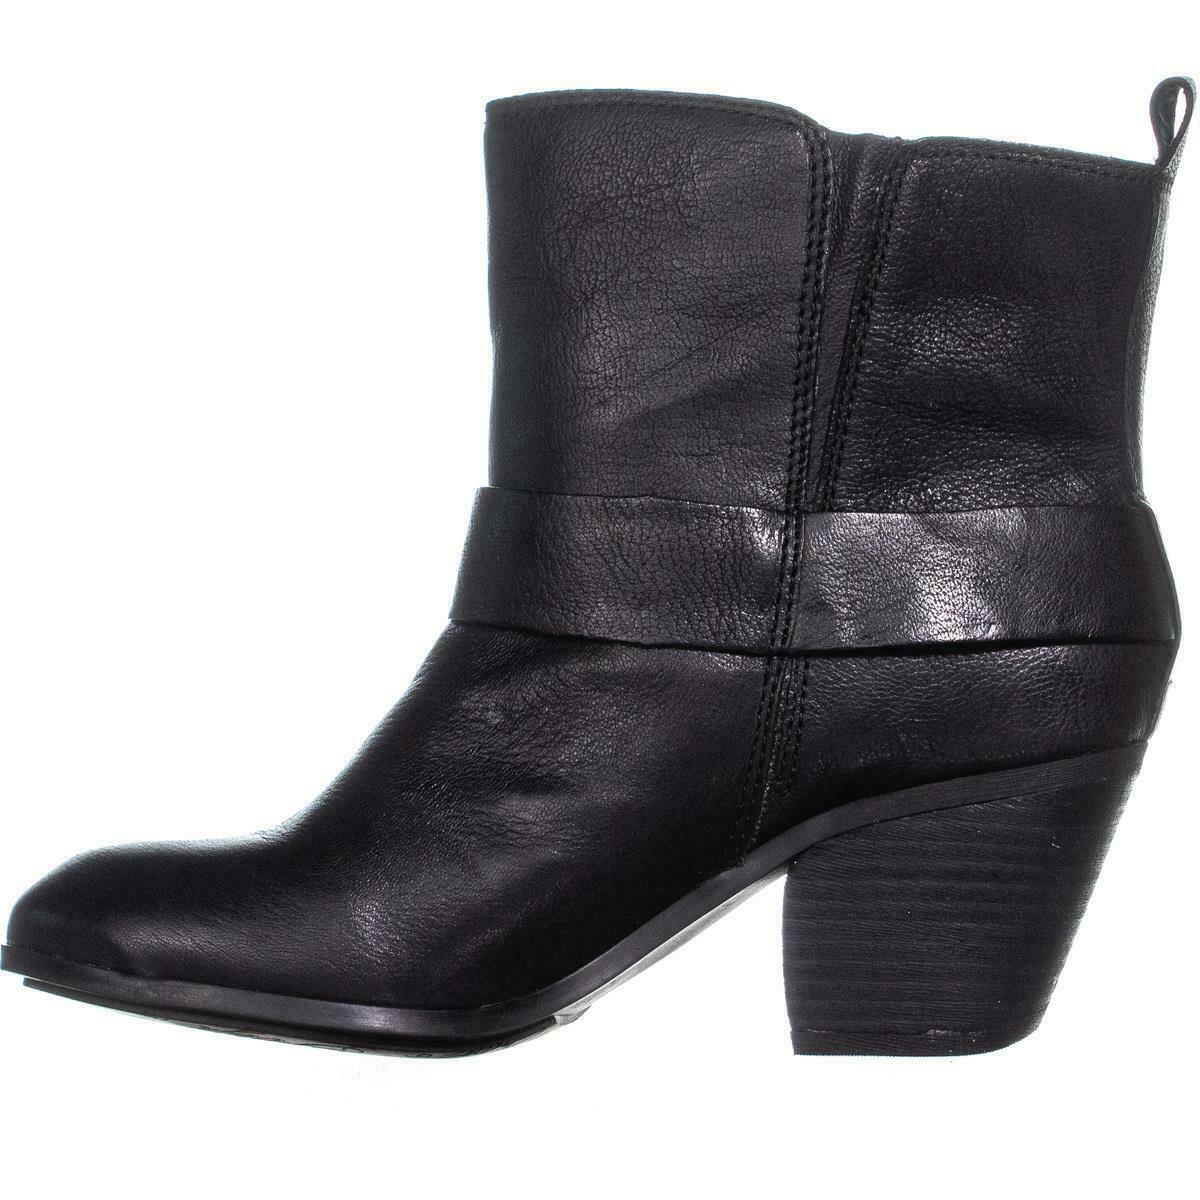 Fergie Footwear Country Too Ankle Boots, Black - Boots